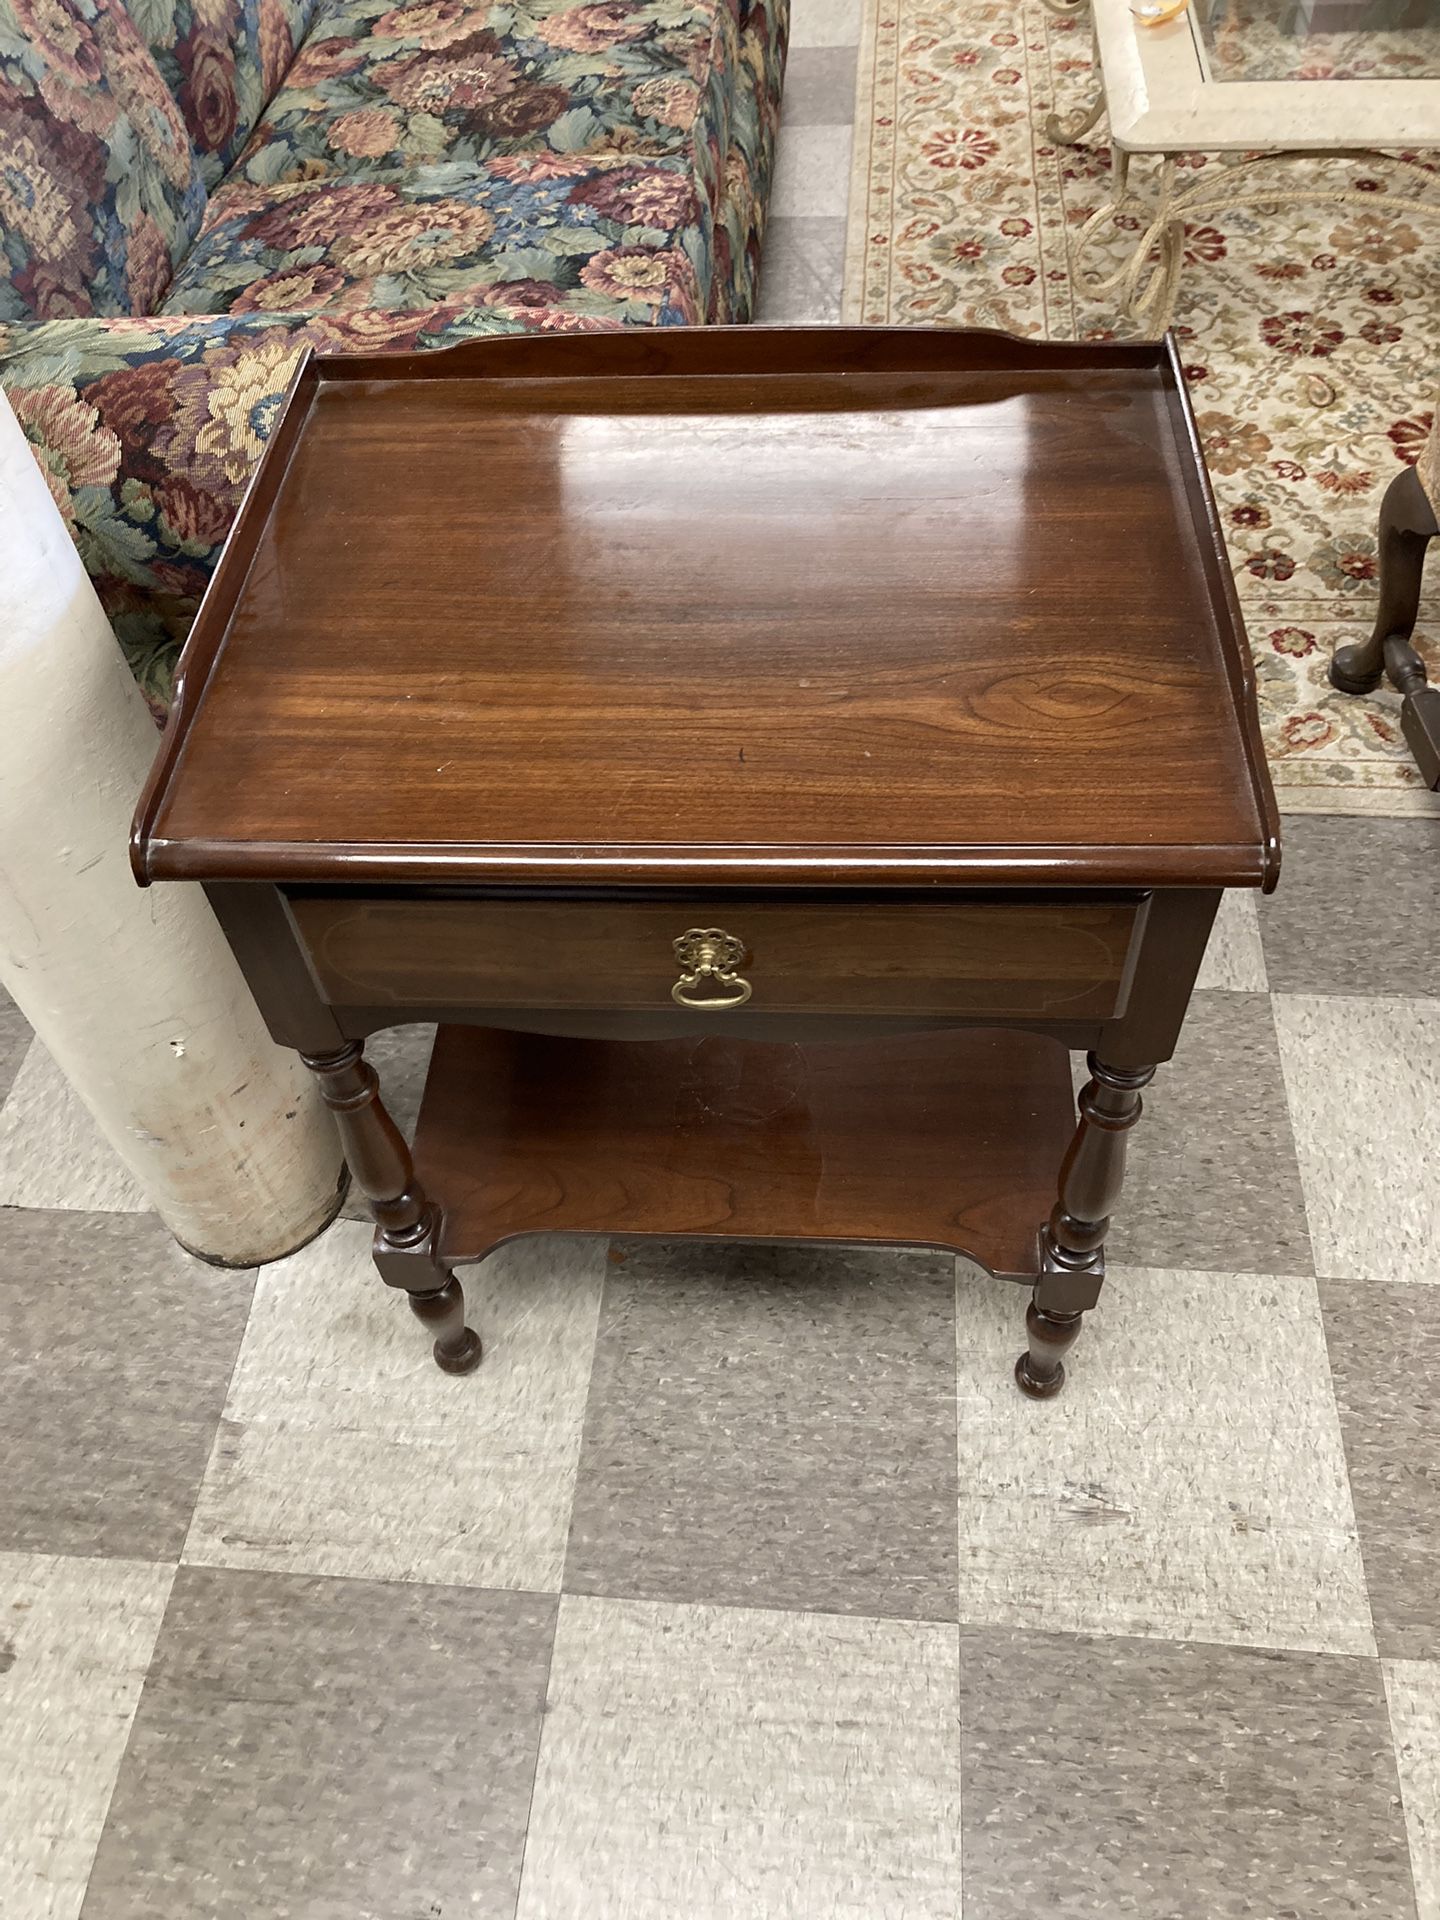 Thomas Veal’s Colonial Furniture 1 Drawer Side Table